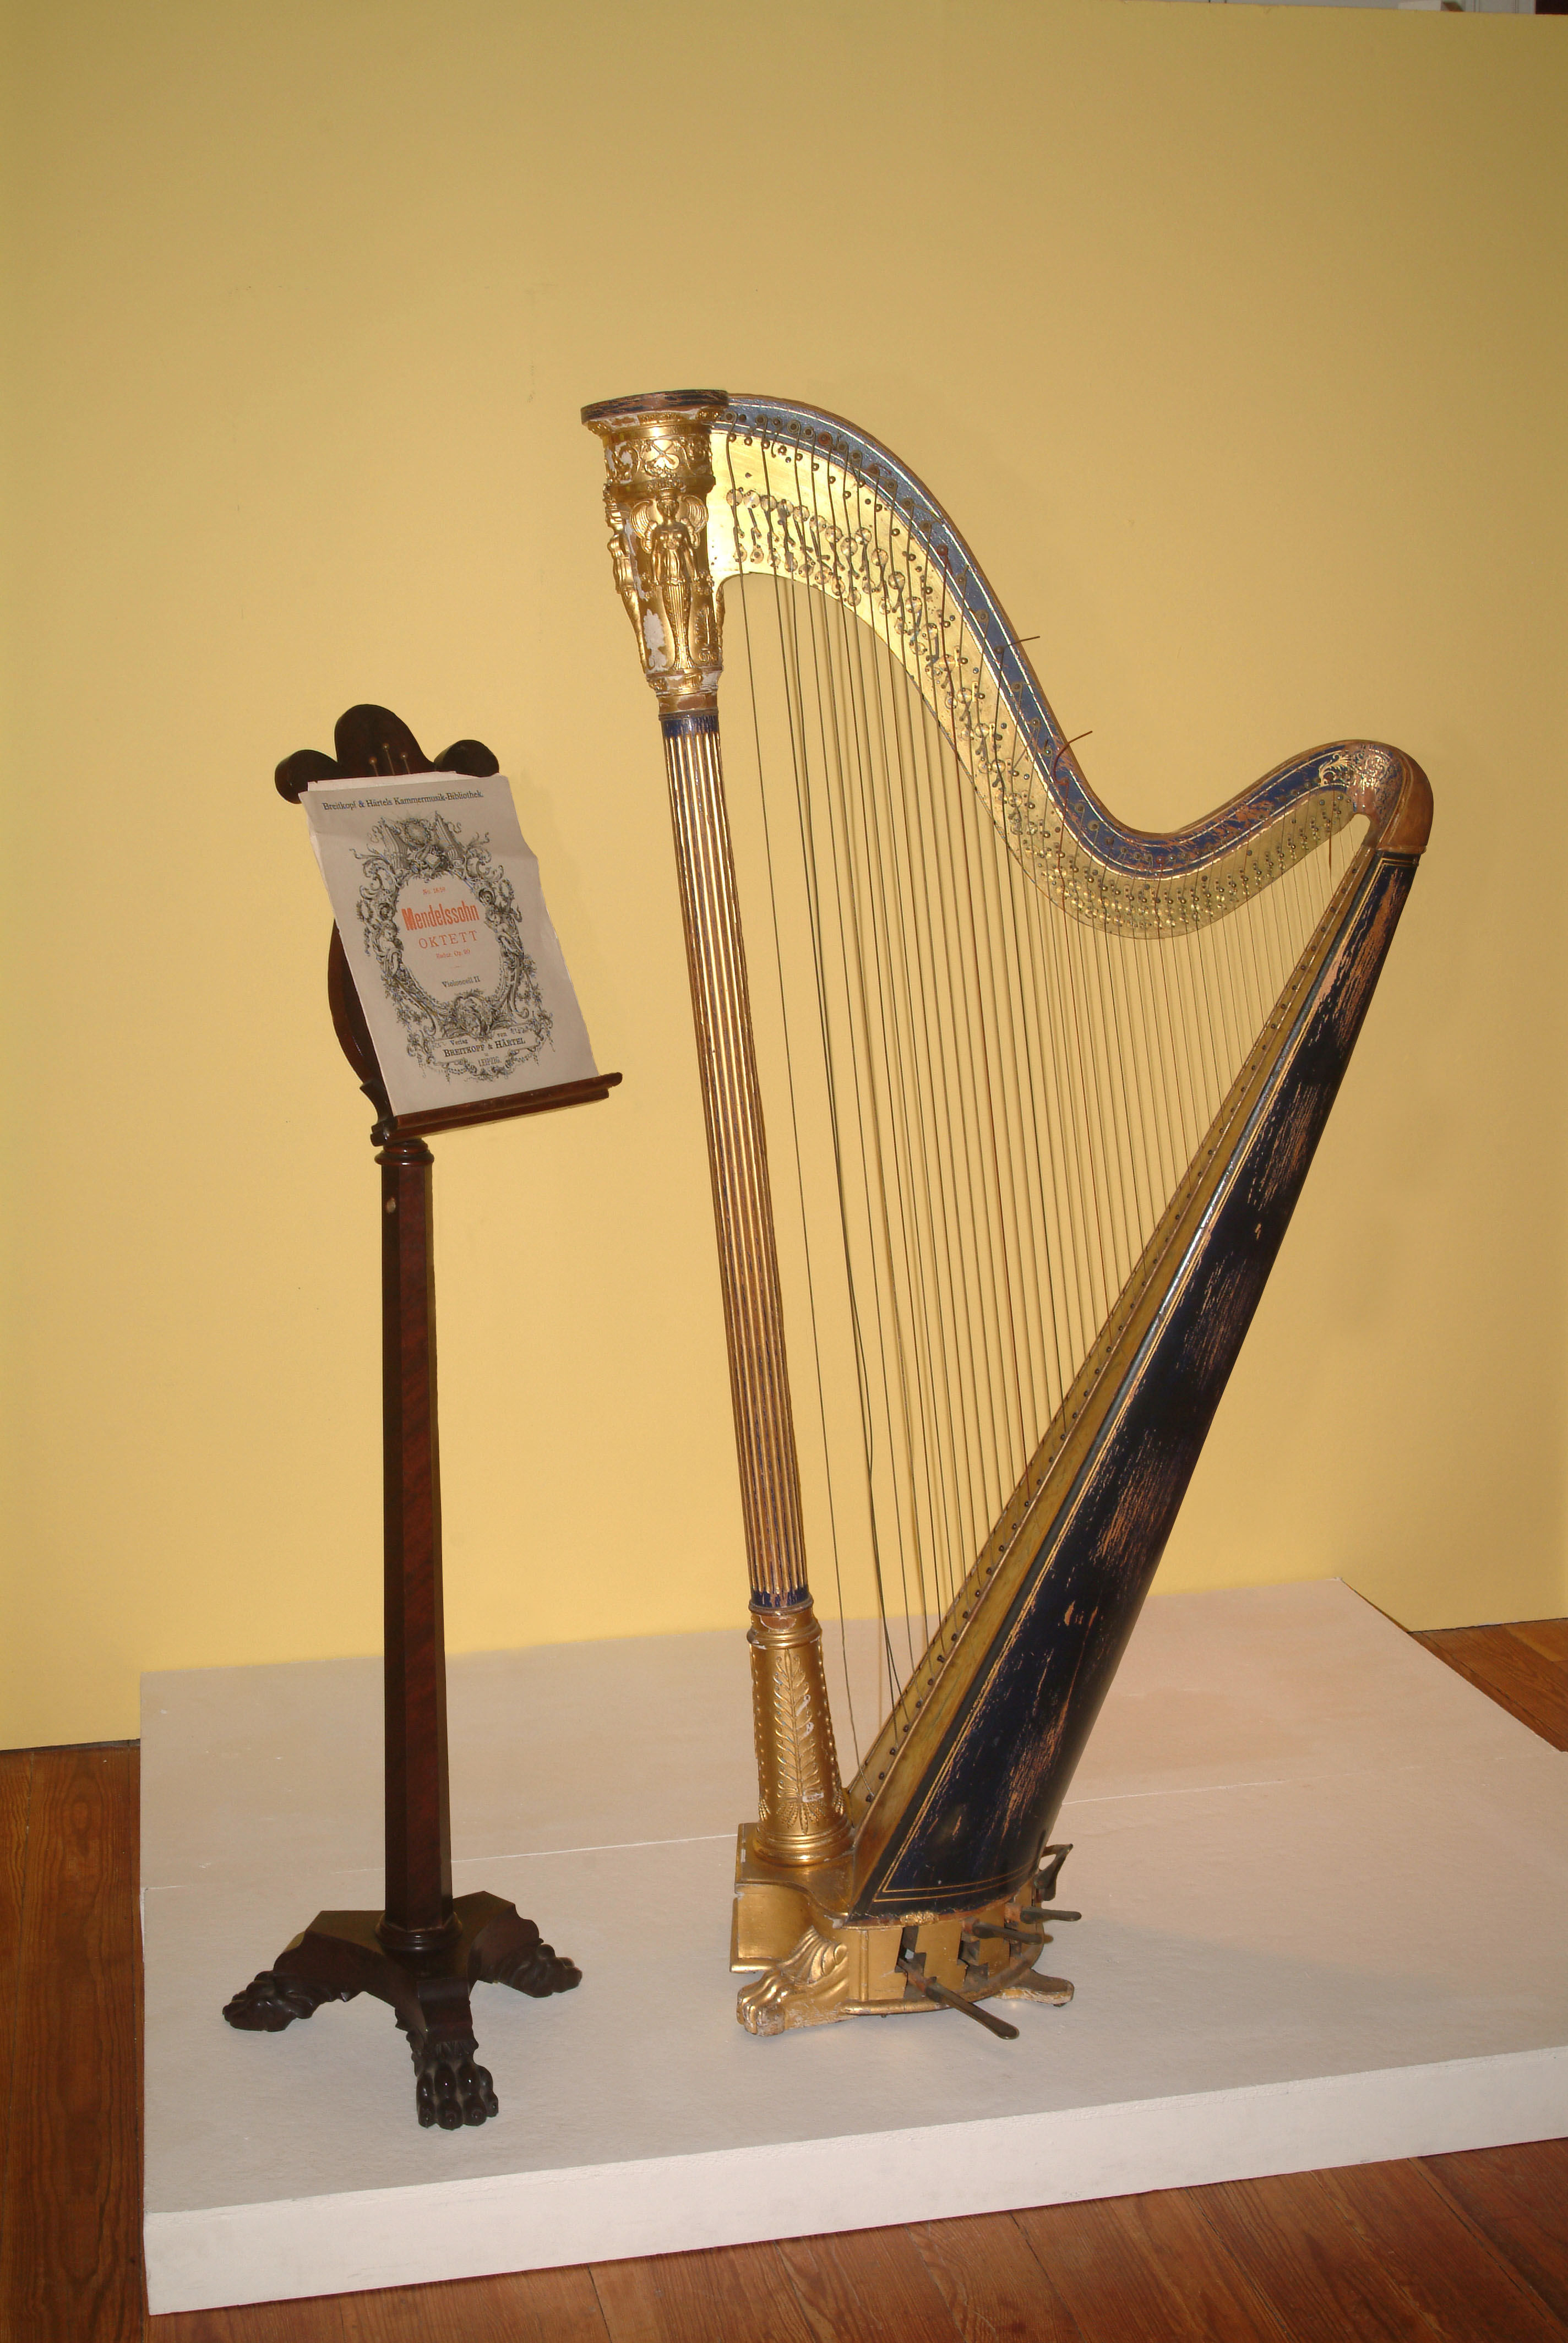 A wooden music stand with sheet music stands next to a large harp.